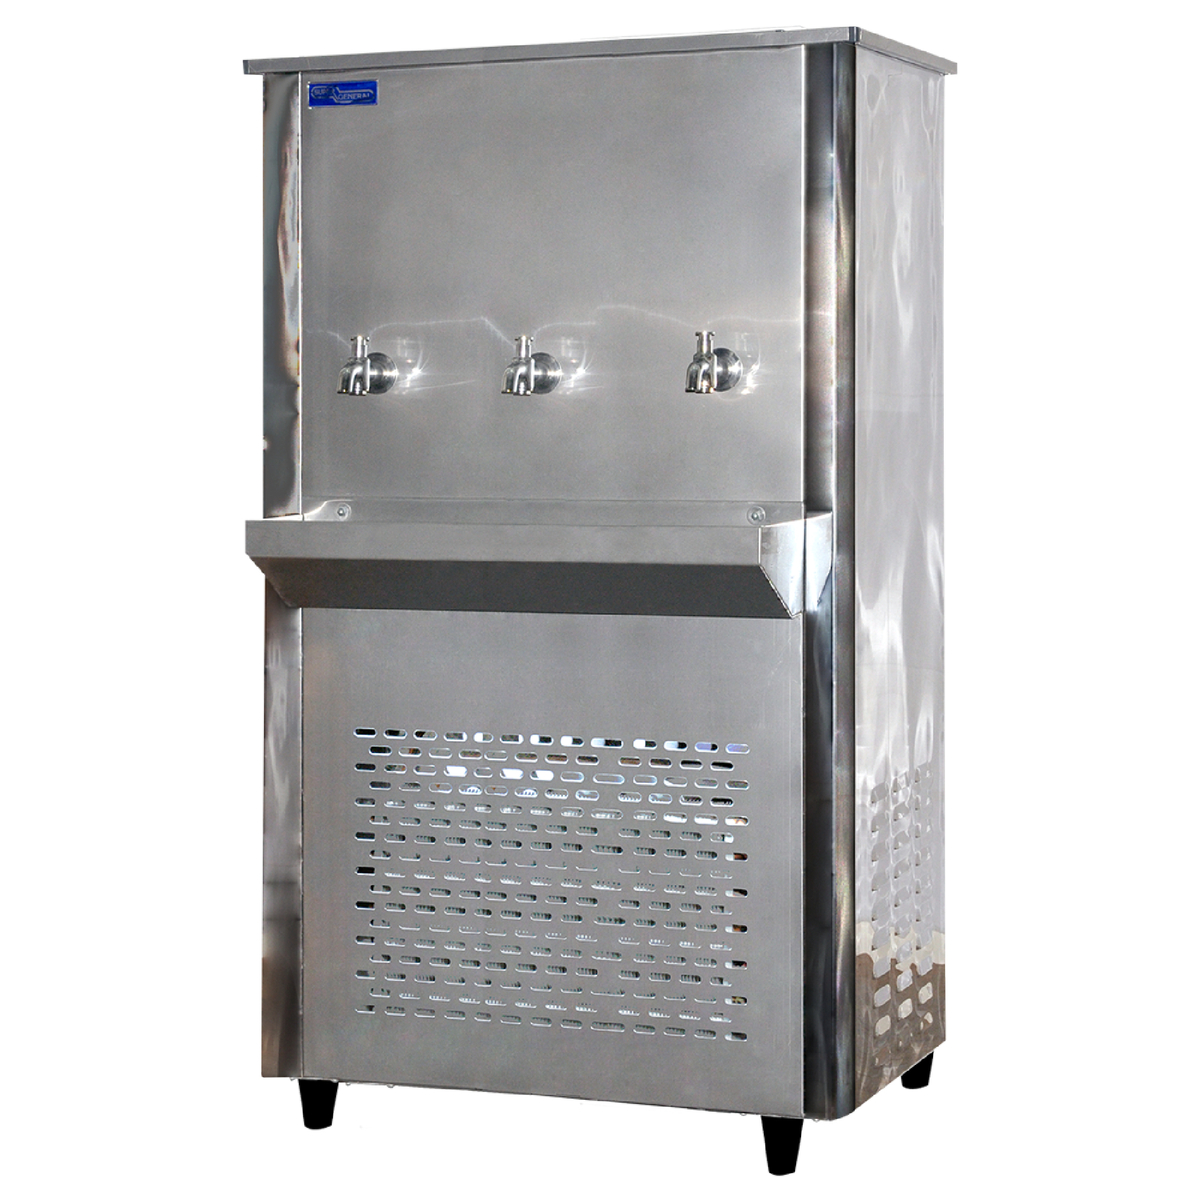 Super General Water Cooler, 70 gallons Capacity, 3 Tap, SG CL 80T3